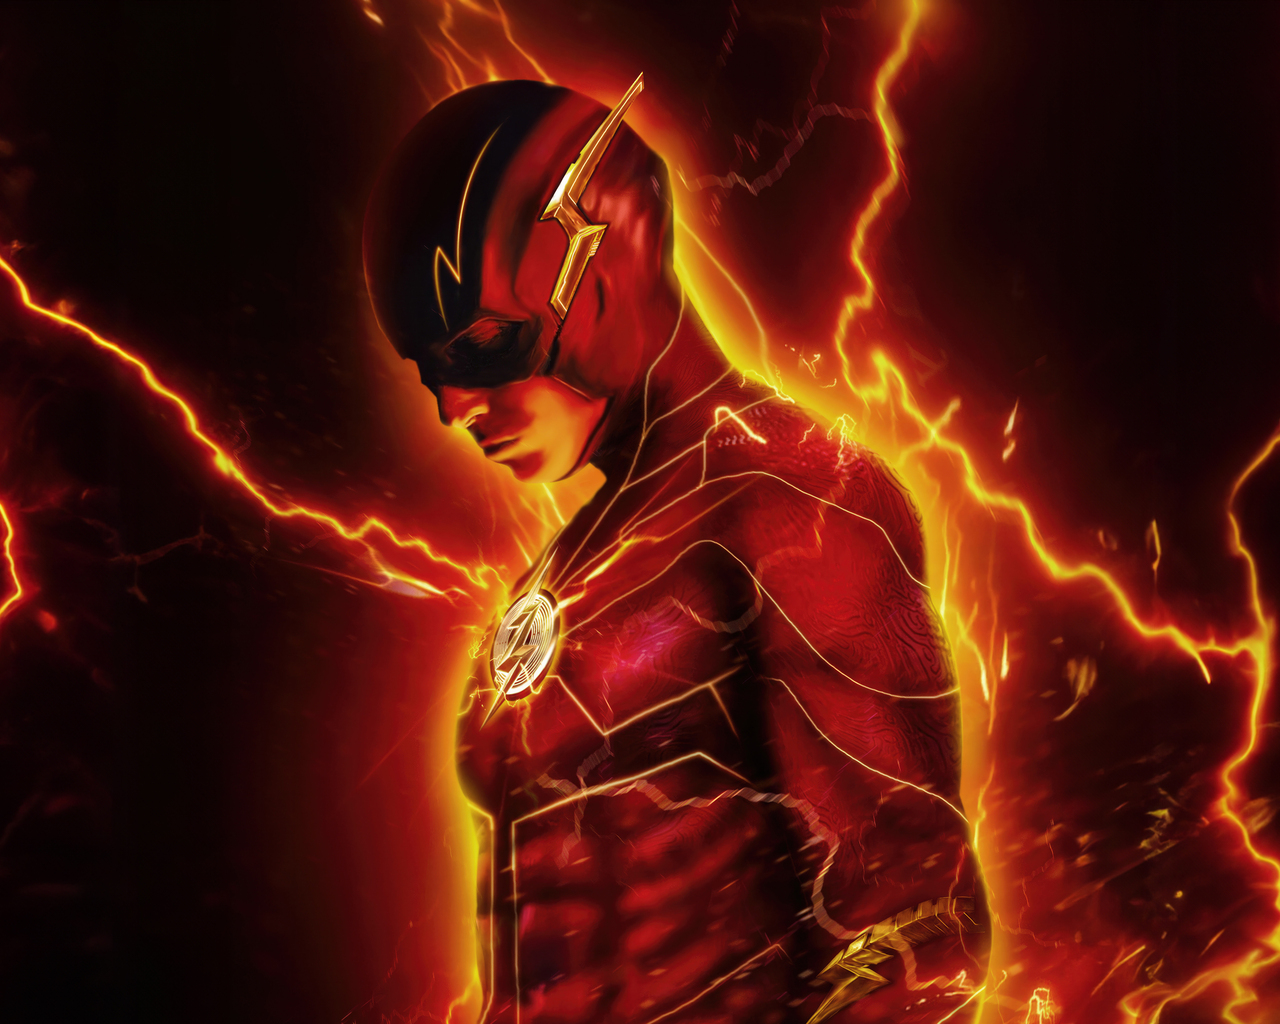 The Flash Speeding Into Action For Justice Wallpaper In 1280x1024 Resolution